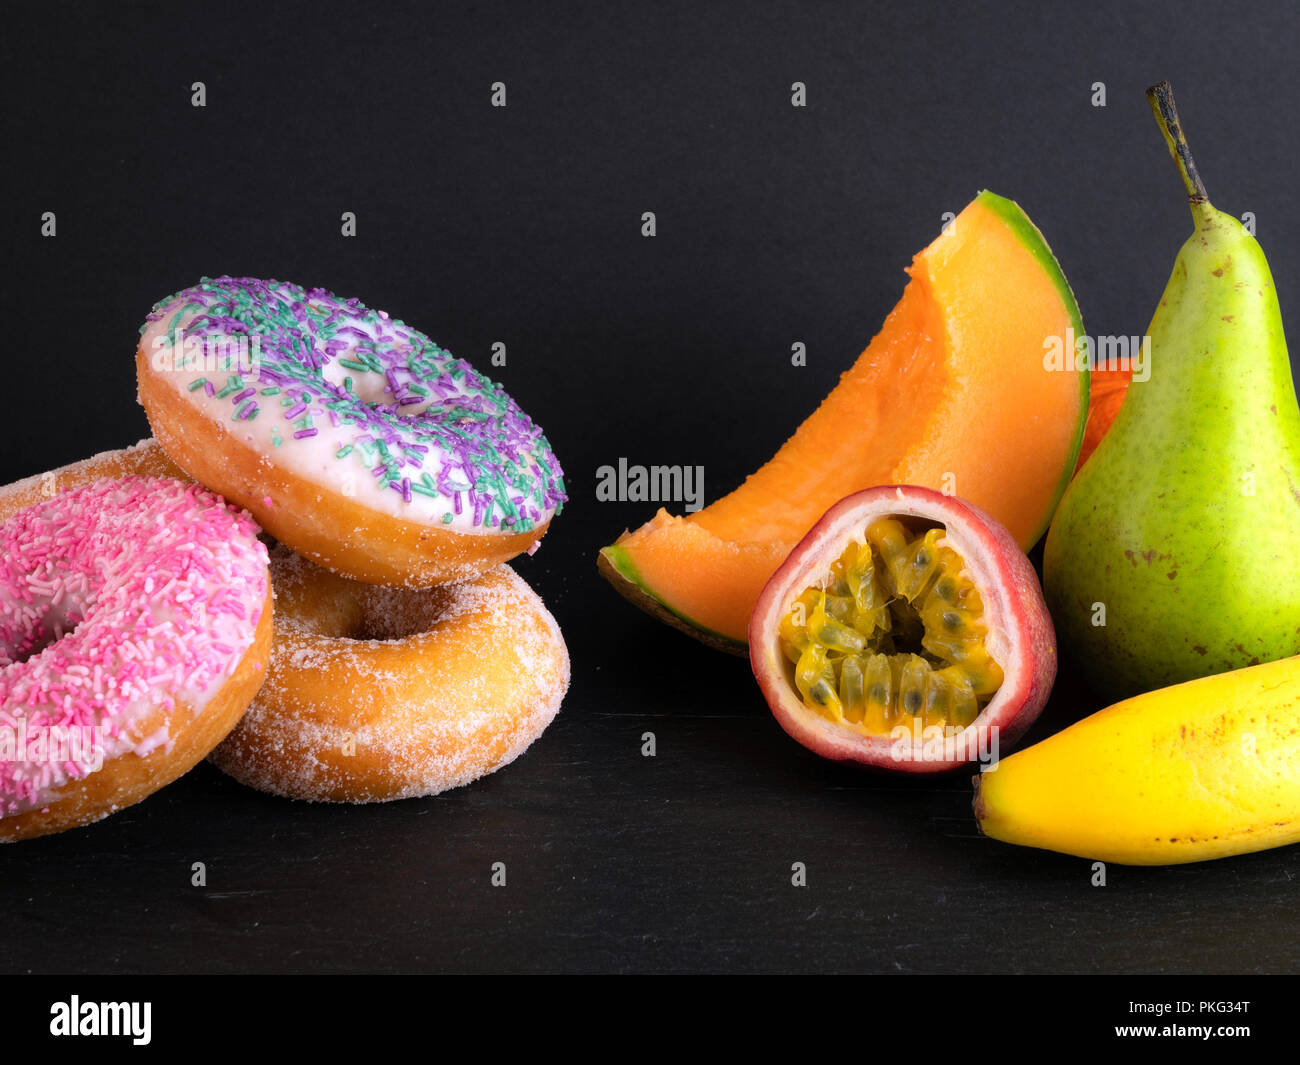 Donuts and fruit showing healthy and unhealthy foods Stock Photo